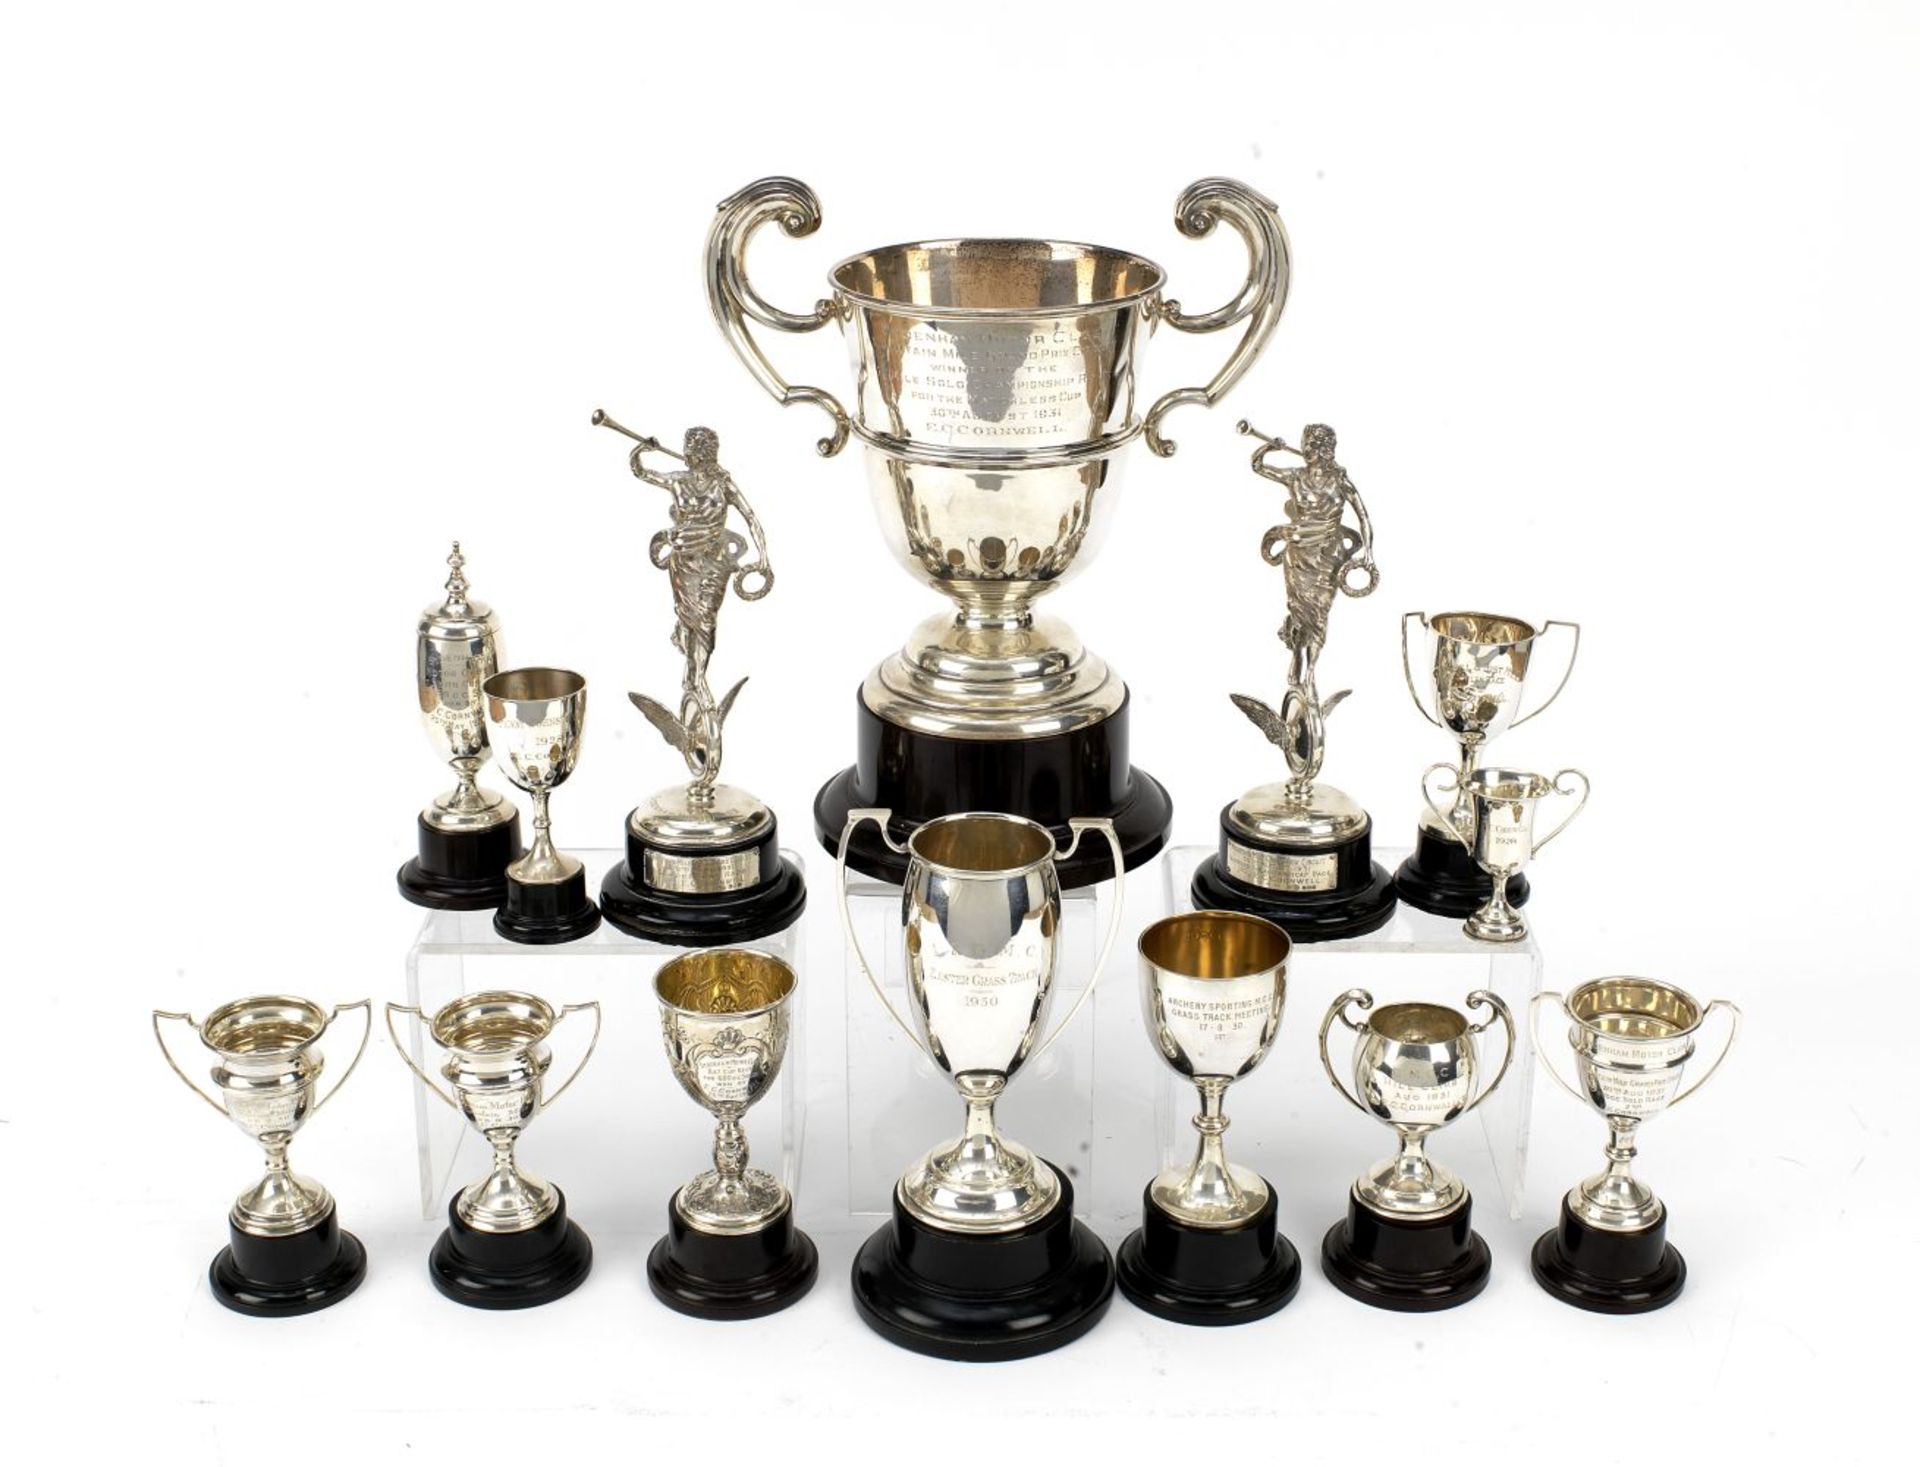 A collection of Sydenham Motor Club sterling silver race trophies awarded to E.C.Cornwell, 1928-1...